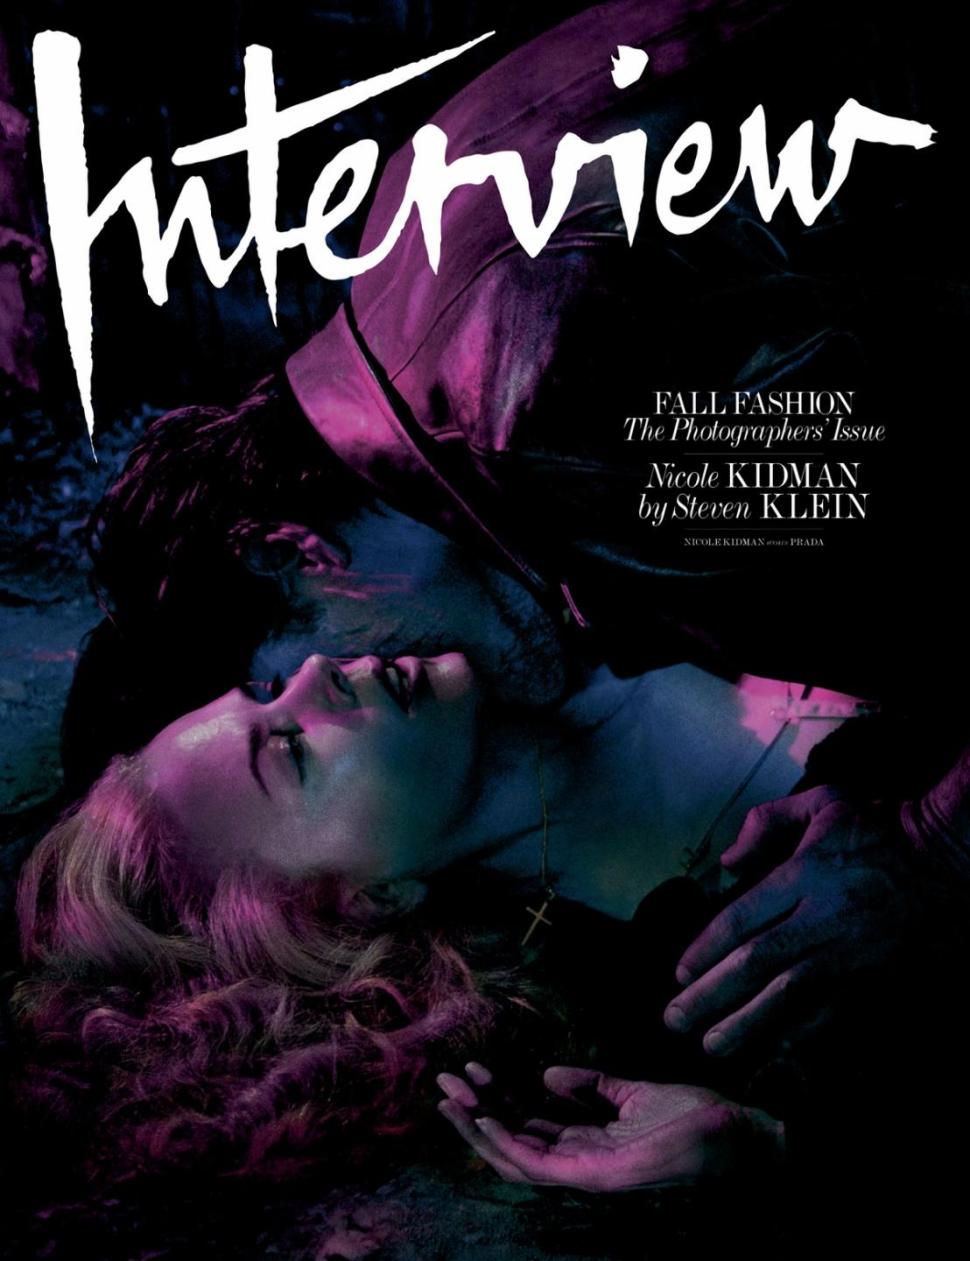 Nicole Kidman is one of six celebs gracing the cover of Interview's fall fashion issue.